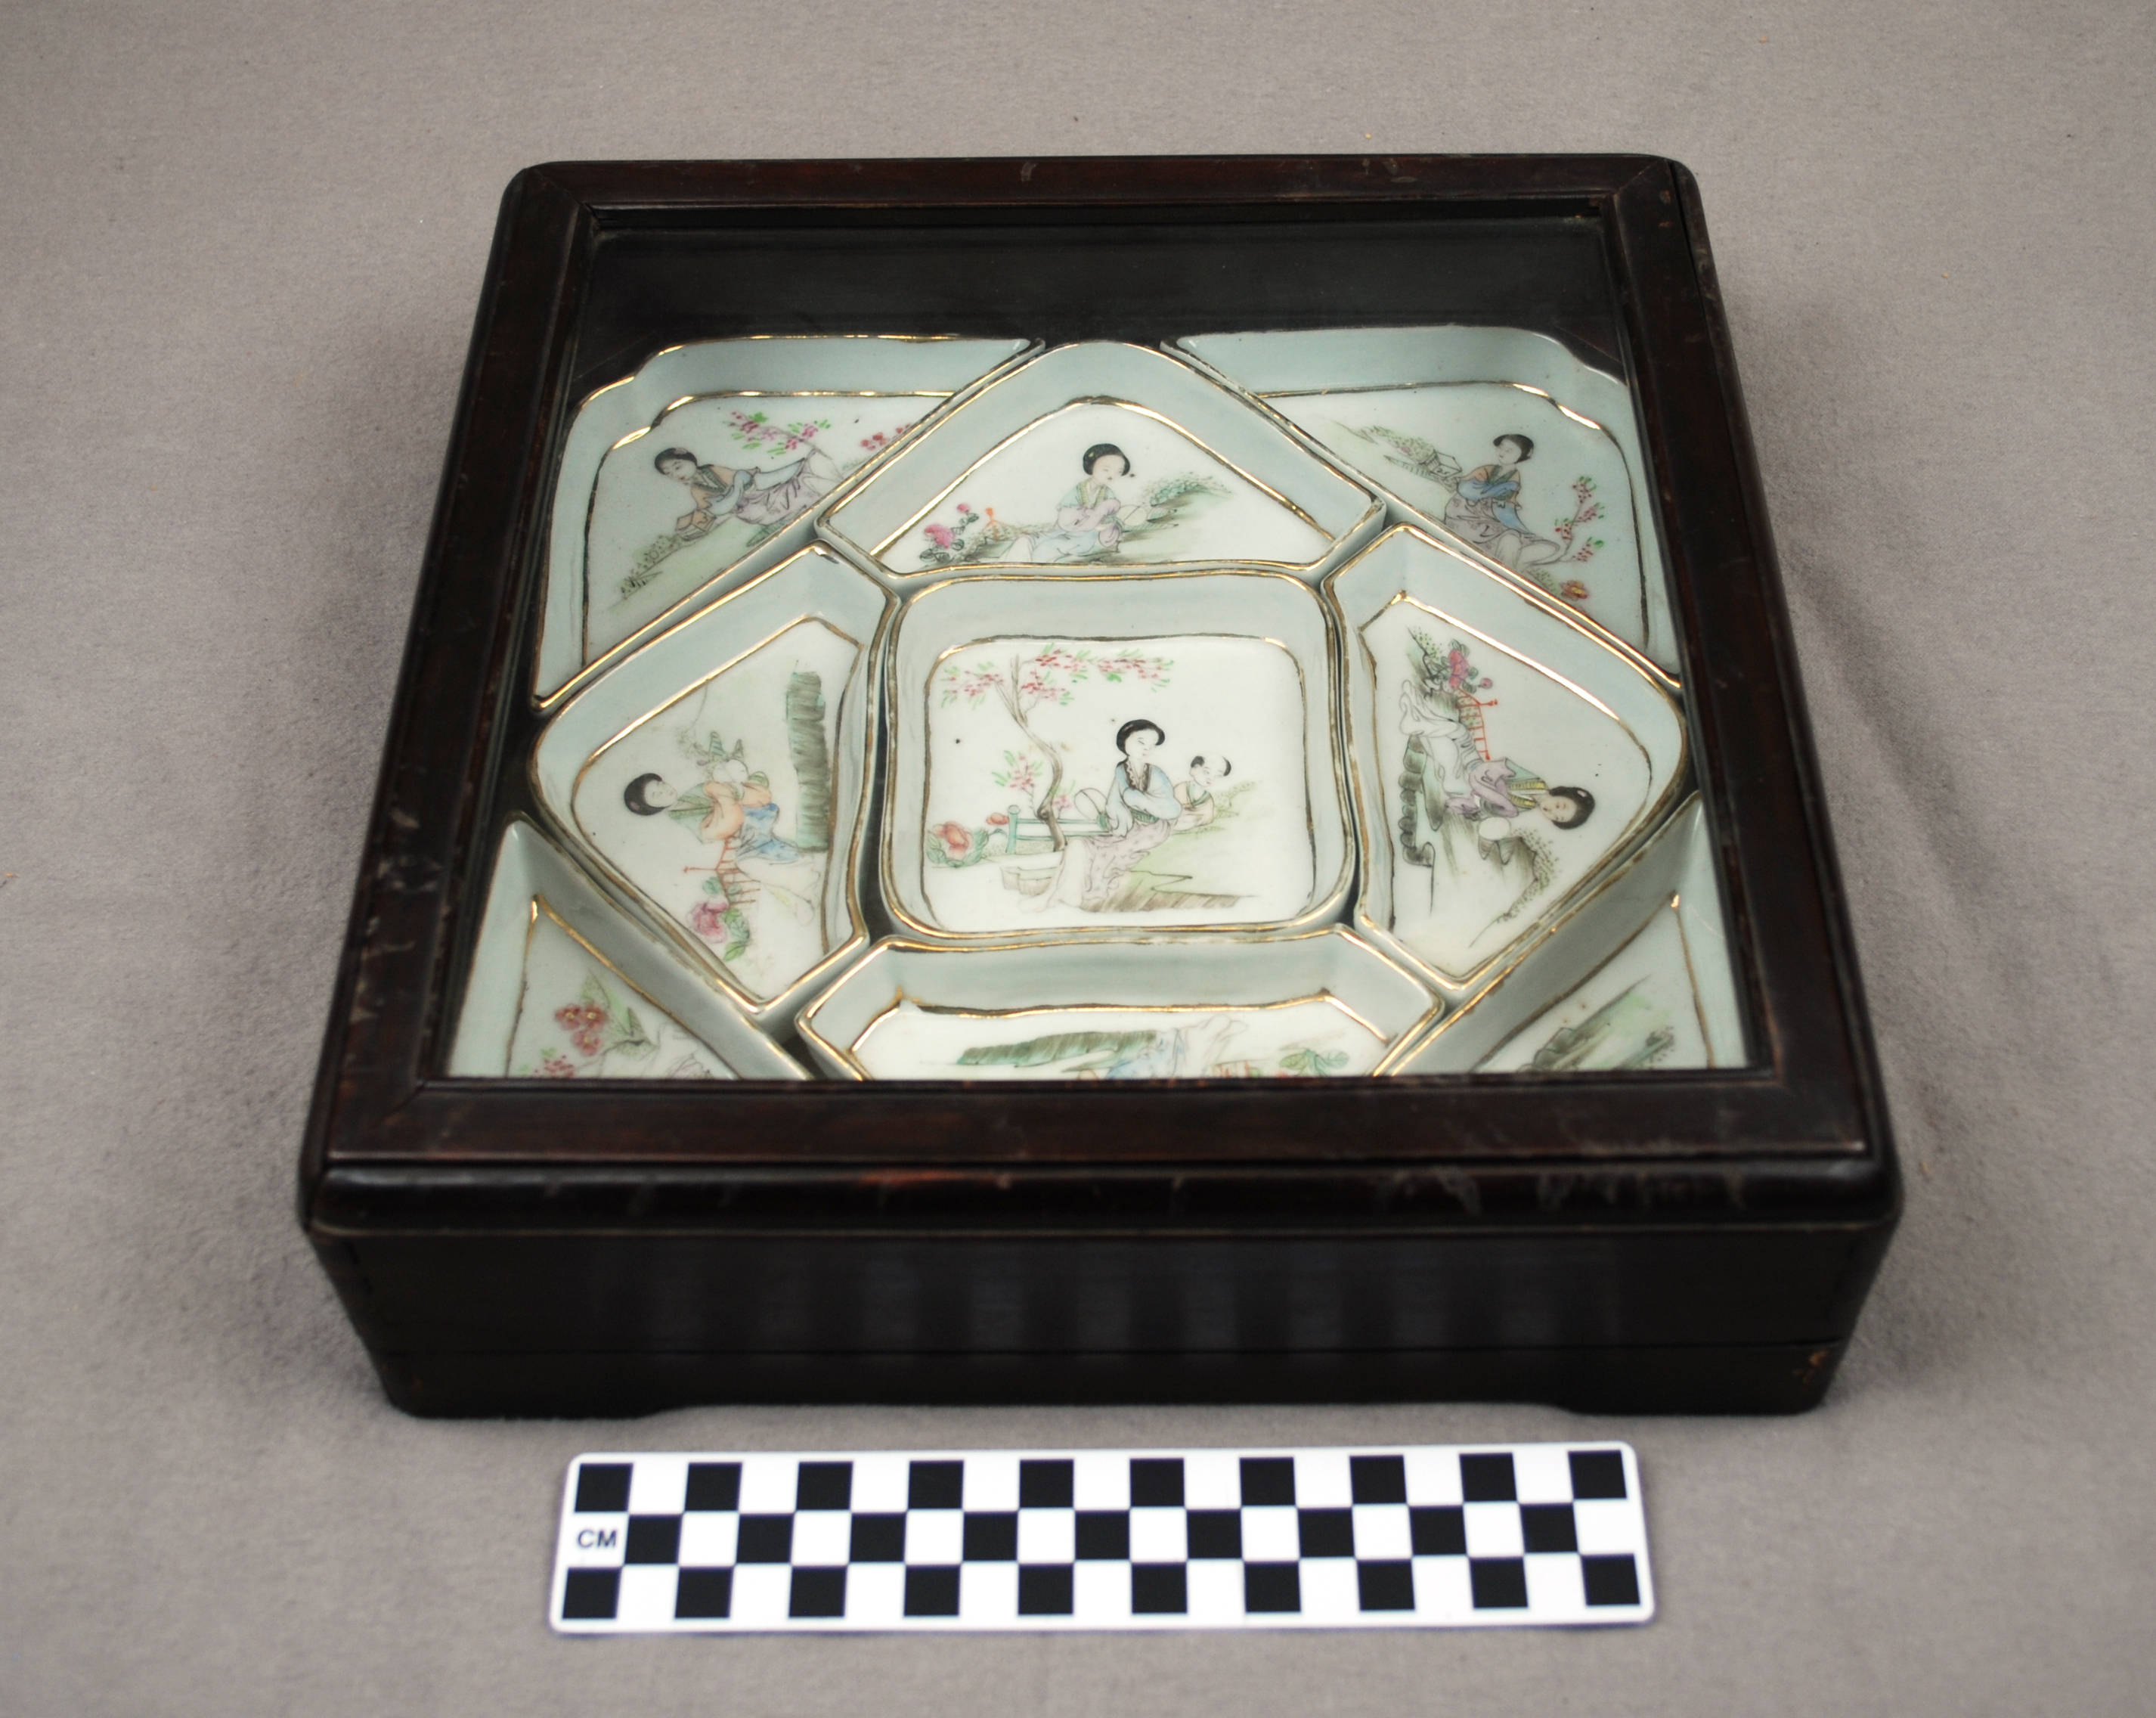 Object: Tray of Togetherness | UTSA Institute Of Texan Cultures